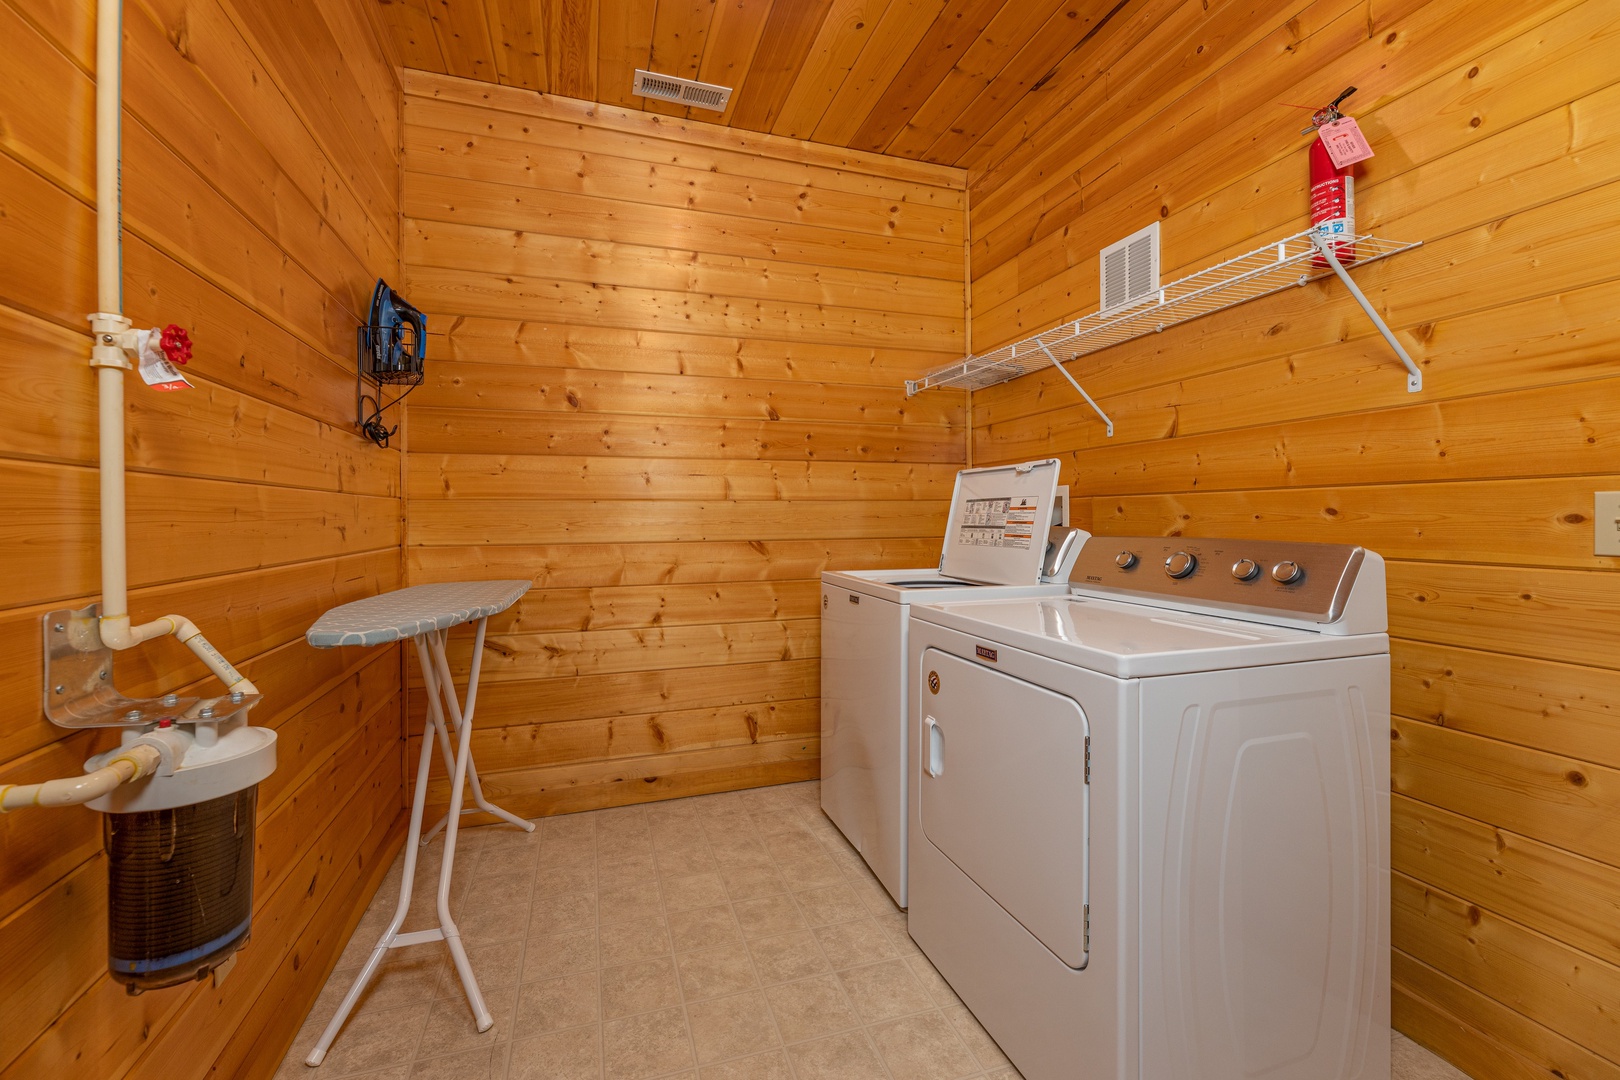 Laundry room with washer, dryer, and ironing board at Grizzly's Den, a 5 bedroom cabin rental located in Gatlinburg